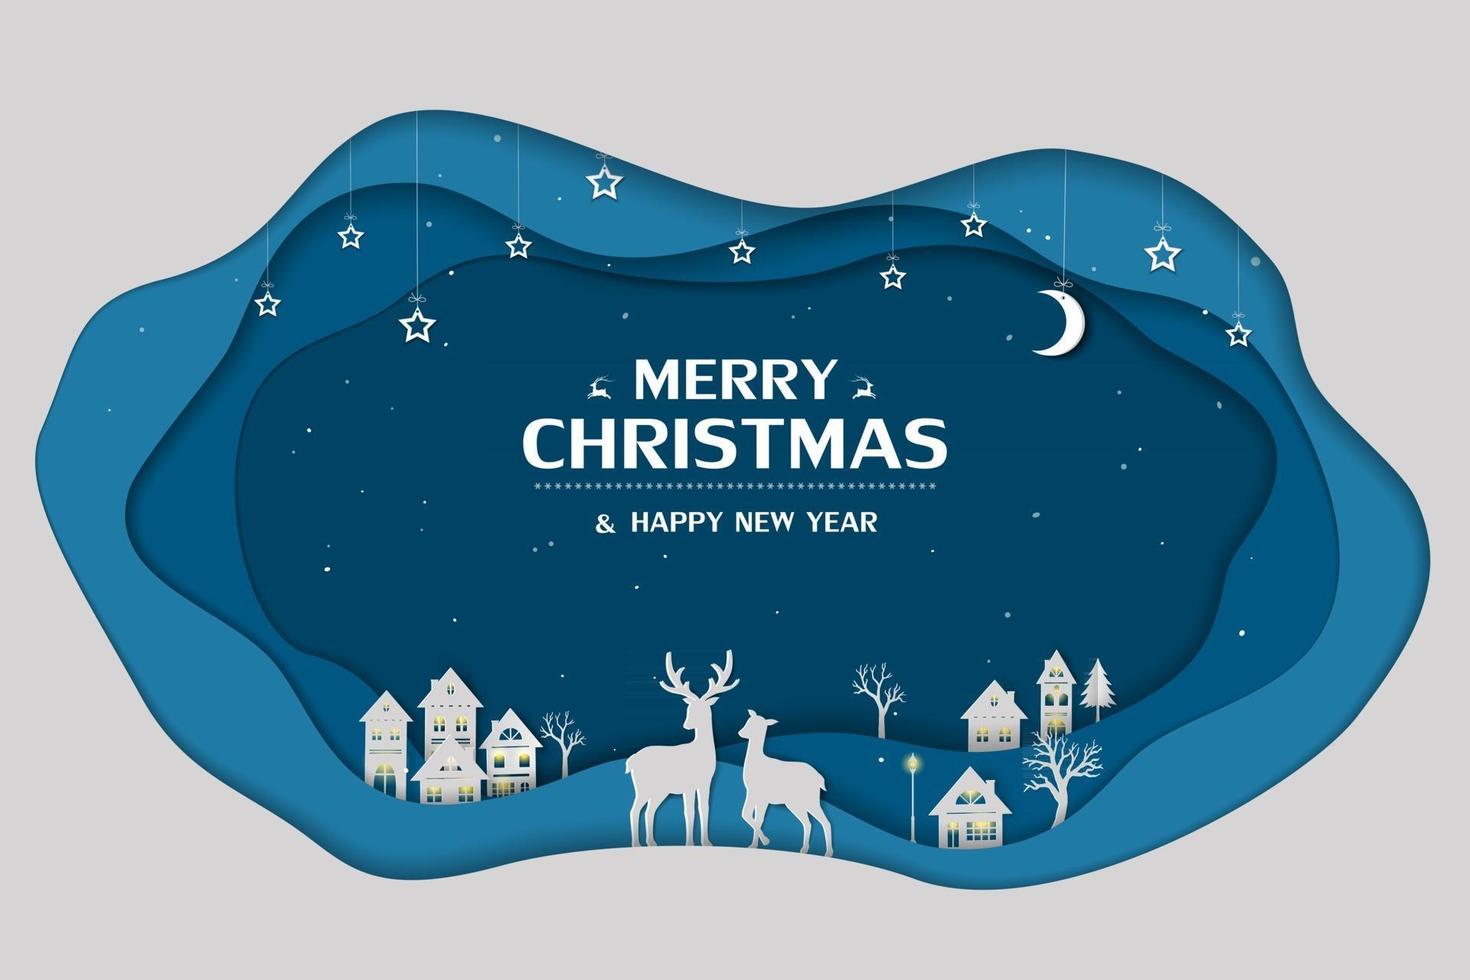 Merry Christmas and happy new year greeting card with paper art background on winter night vector